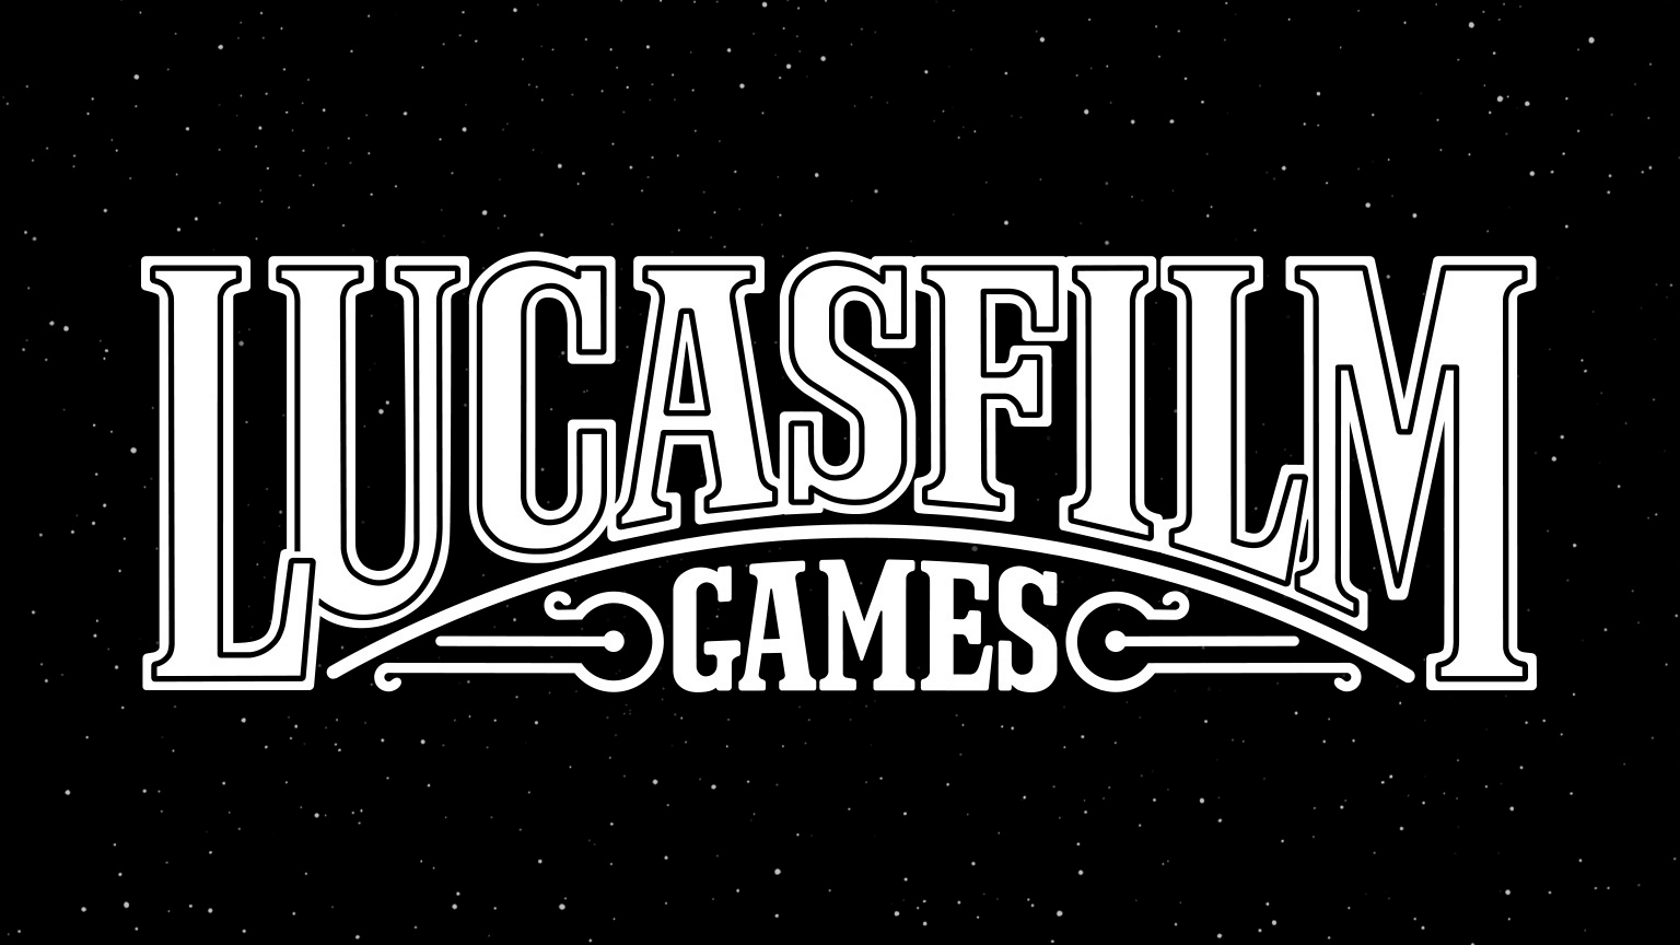 Disney revives Lucasfilm Games brand to begin a 'new era' of Star Wars titles